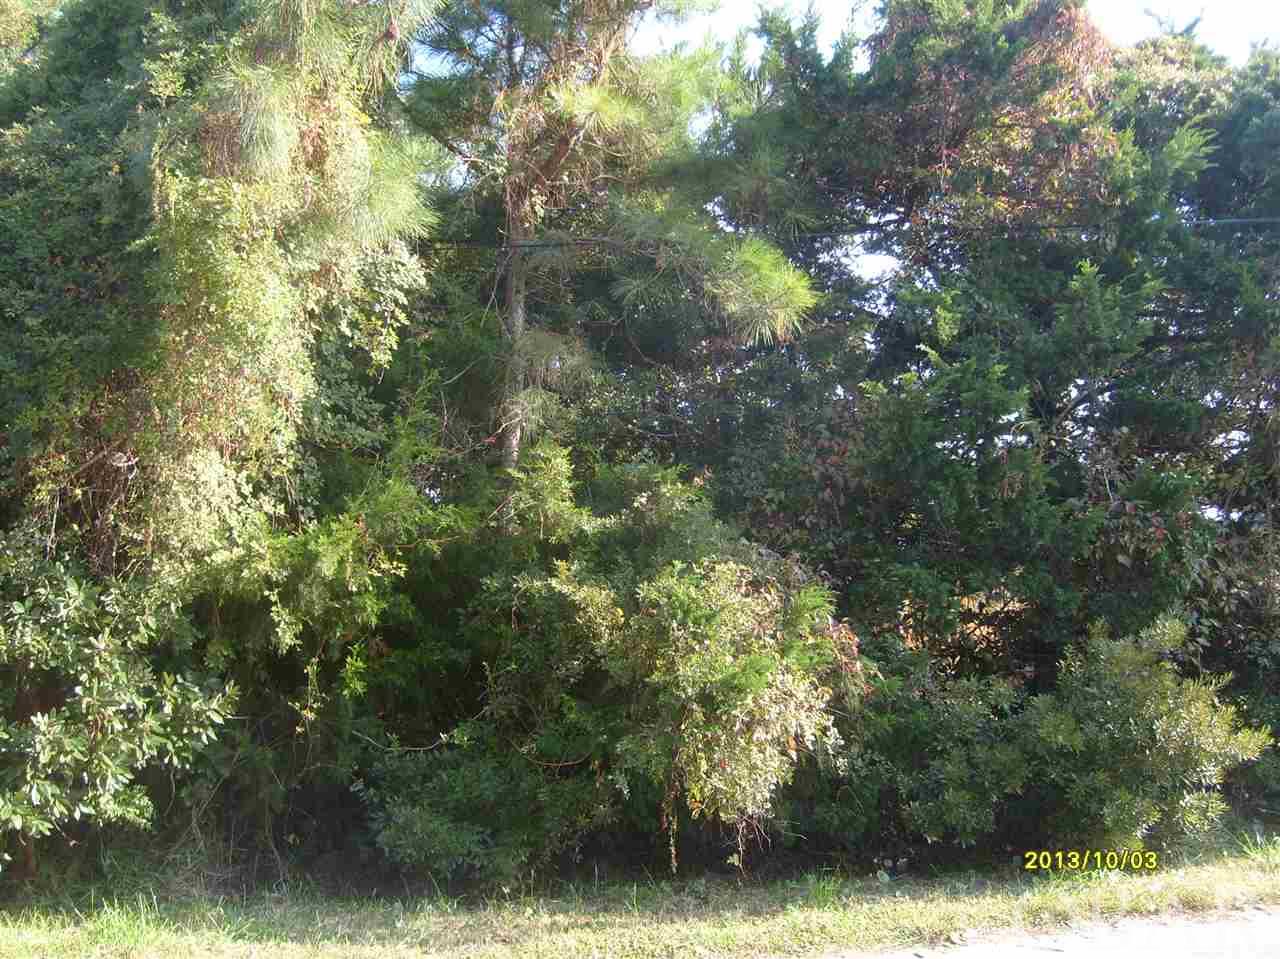 A residential building lot in the Jackson Dunes subdivision with over 10,000 sq. ft.  This property has many mature trees, accessed by a paved public road, wonderful neighbors and located in a subdivision with restrictive covenants to protect the beauty of the subdivision. Peaceful island living, tucked away from the village, but still close enough to bike or stroll to stores, "downtown", restaurants and the harbor. The Hyde County Health Department has permitted this property for a 4 bedroom home, septic permit conveys with the sale.